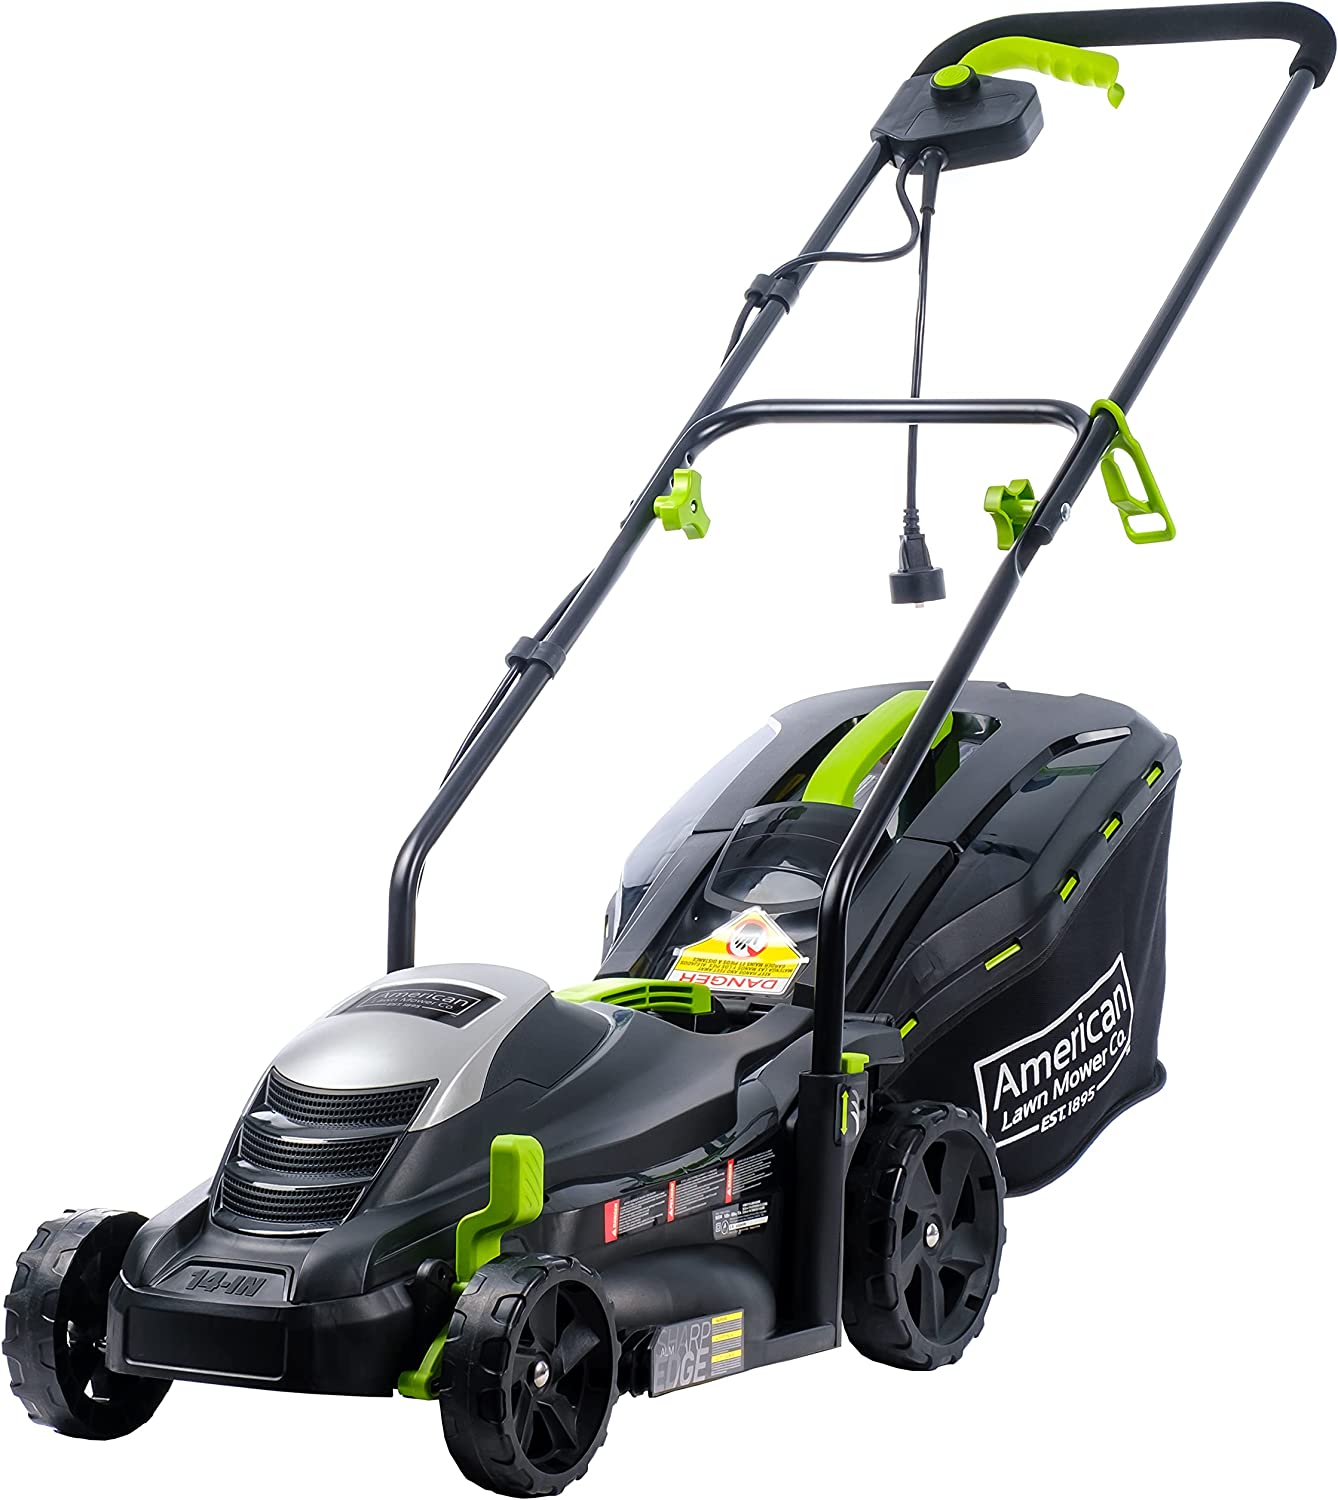 Best Lightweight Lawnmowers for tough mowing